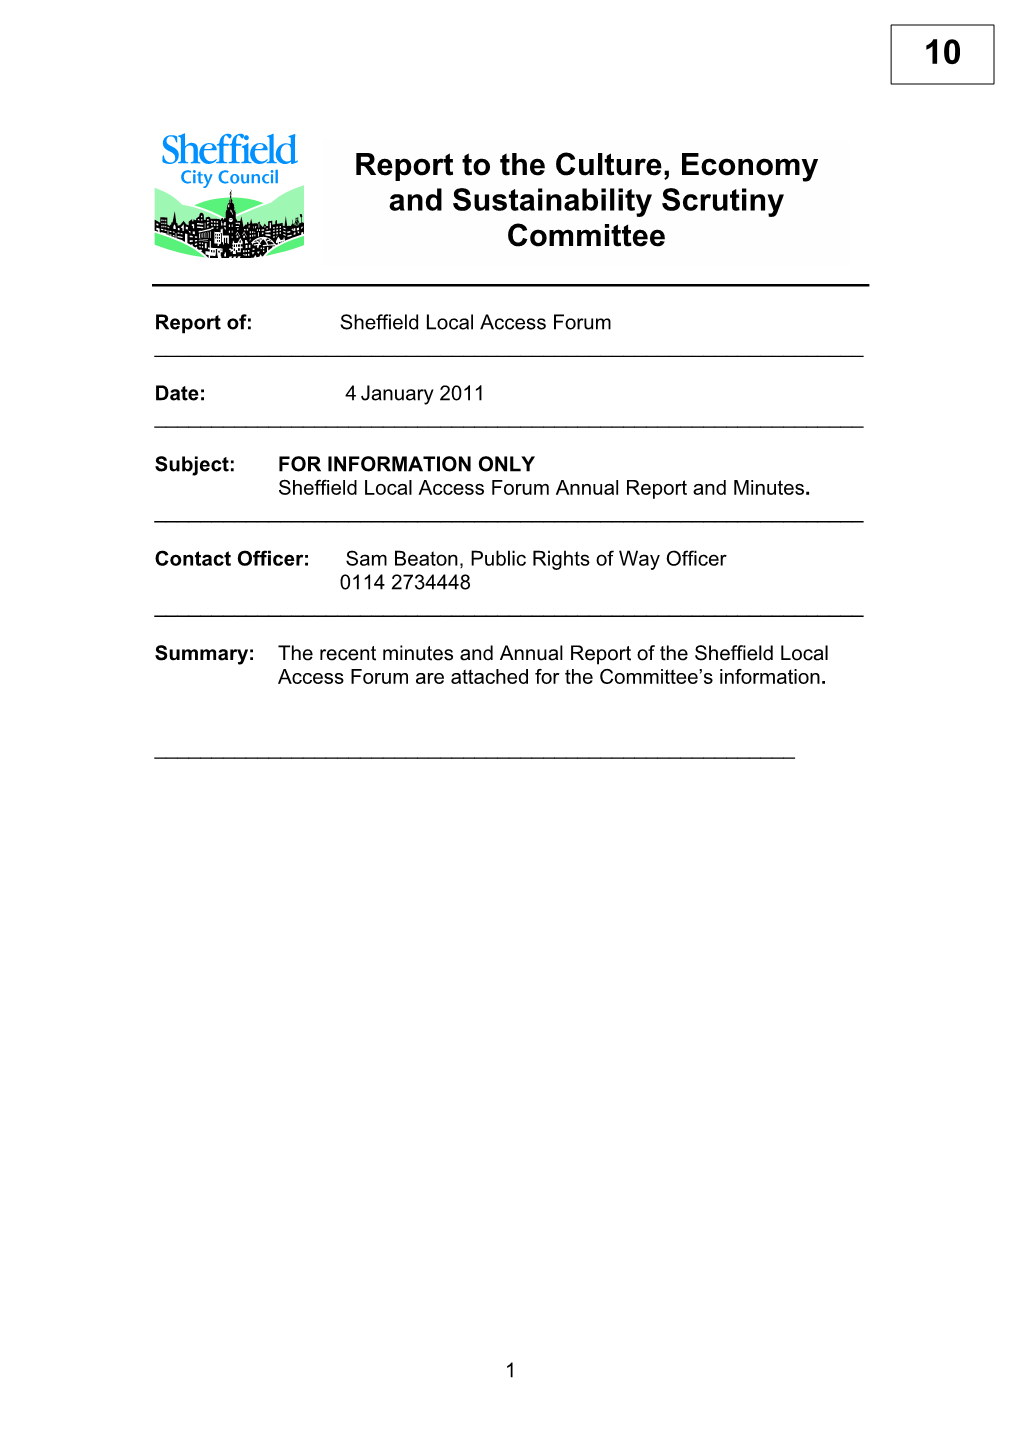 Report to the Culture, Economy and Sustainability Scrutiny Committee